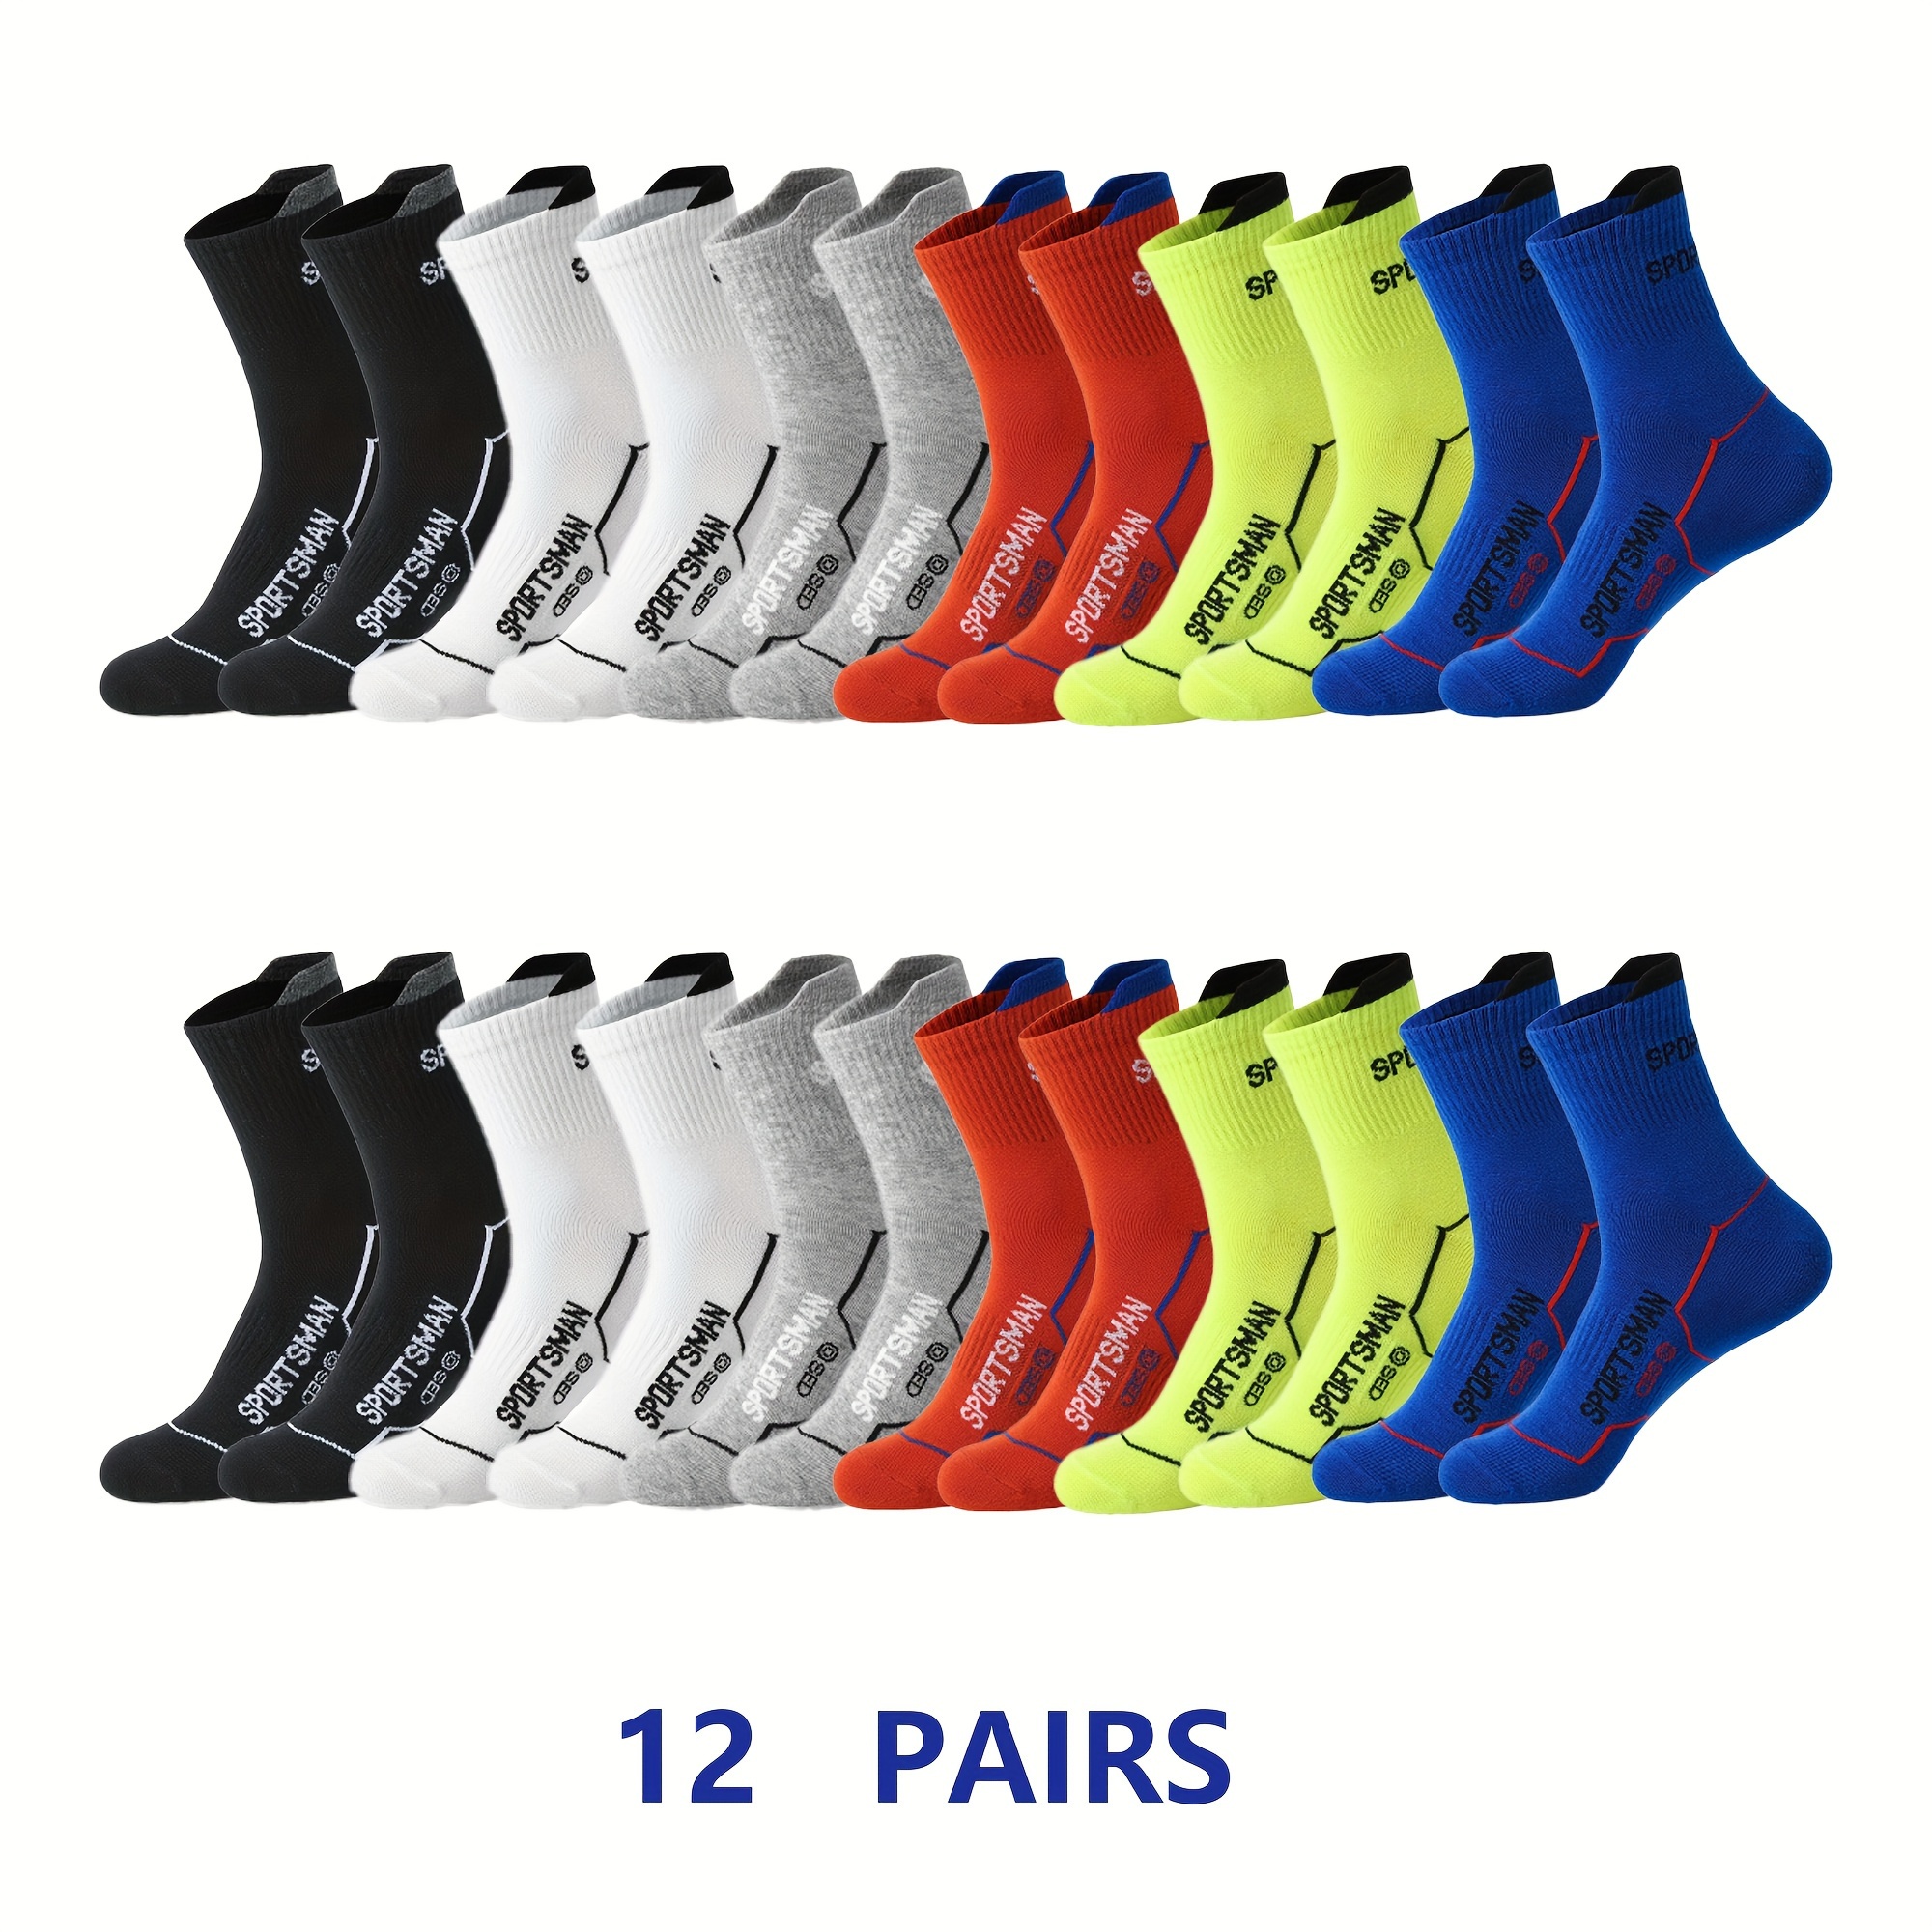 

12 Pairs Men's Mid-calf Athletic Socks, Moisture-wicking Anti-odor Cotton Crew Socks For Running, Cycling, Fitness, Basketball, Outdoor, Hiking - Assorted Colors